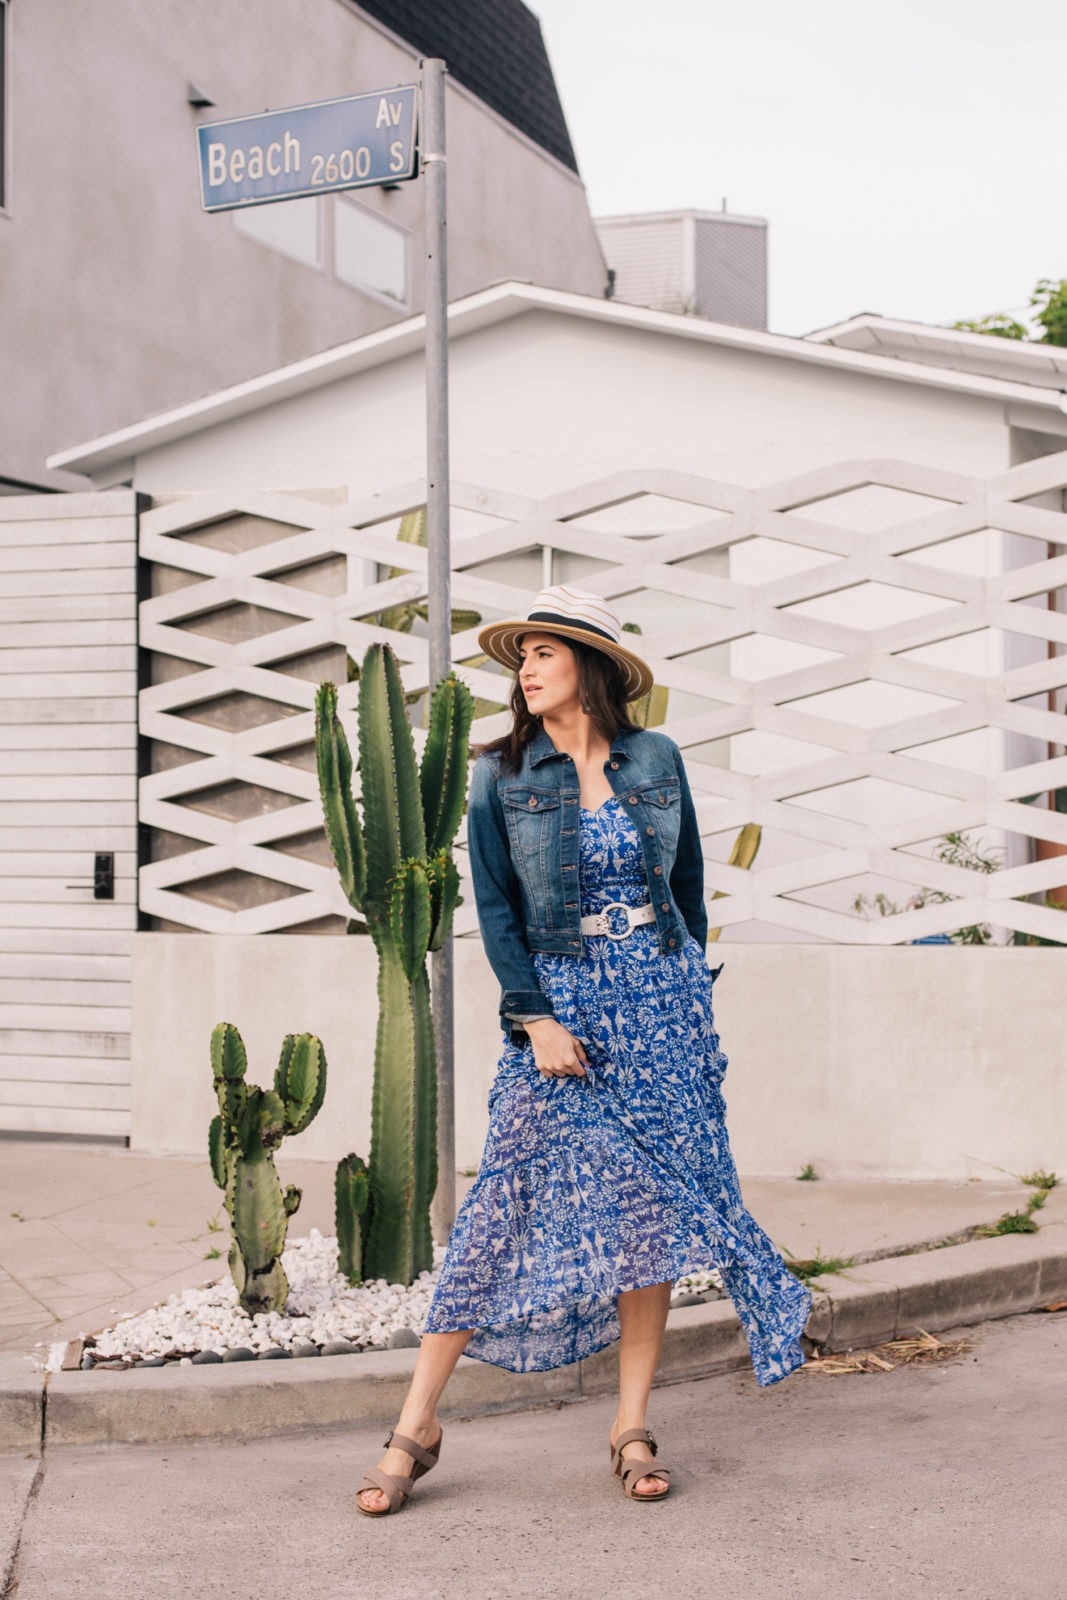 Dansko Sandals, summer essentials, styled by top US fashion blogger, Laura Lily: image of a woman wearing a floral maxi dress, denim jacket, Panama straw hat and Dansko sandals